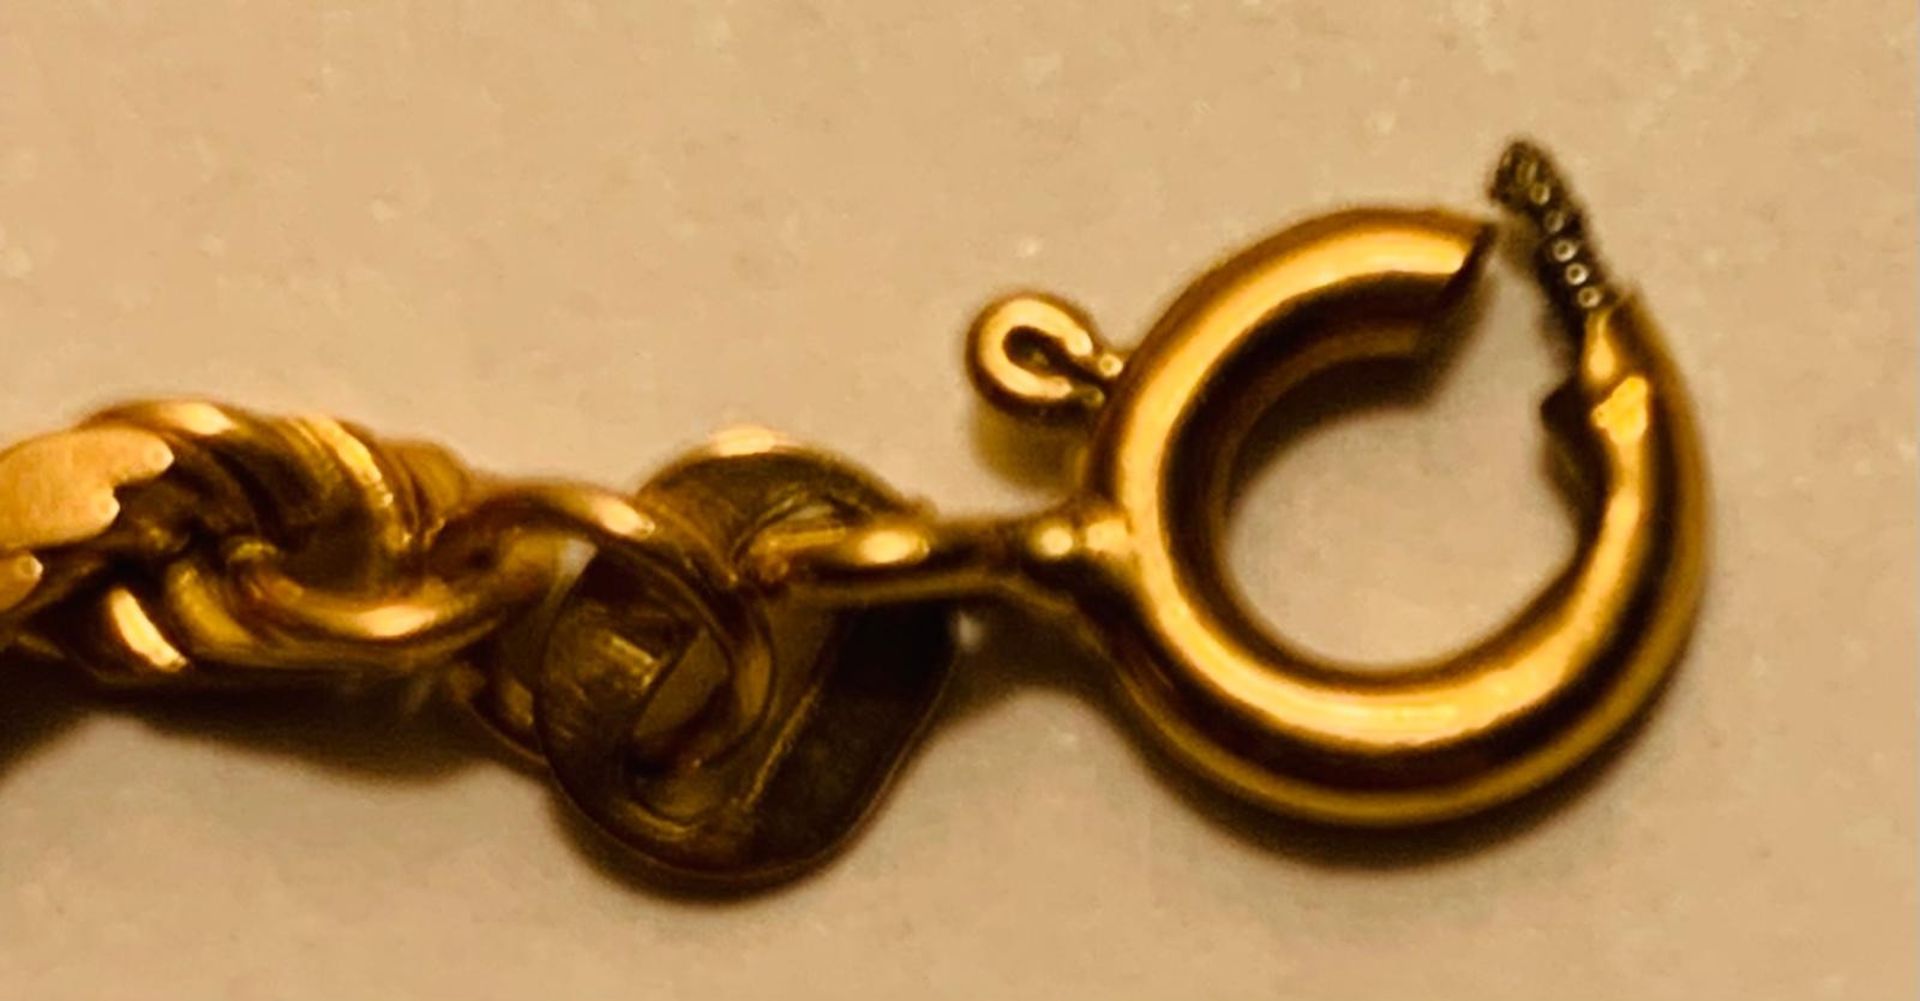 9ct GOLD CHAIN, APPROX 50.5cm LONG AND WEIGHT APPROX 11.86g CLASP DAMAGED - Image 3 of 4